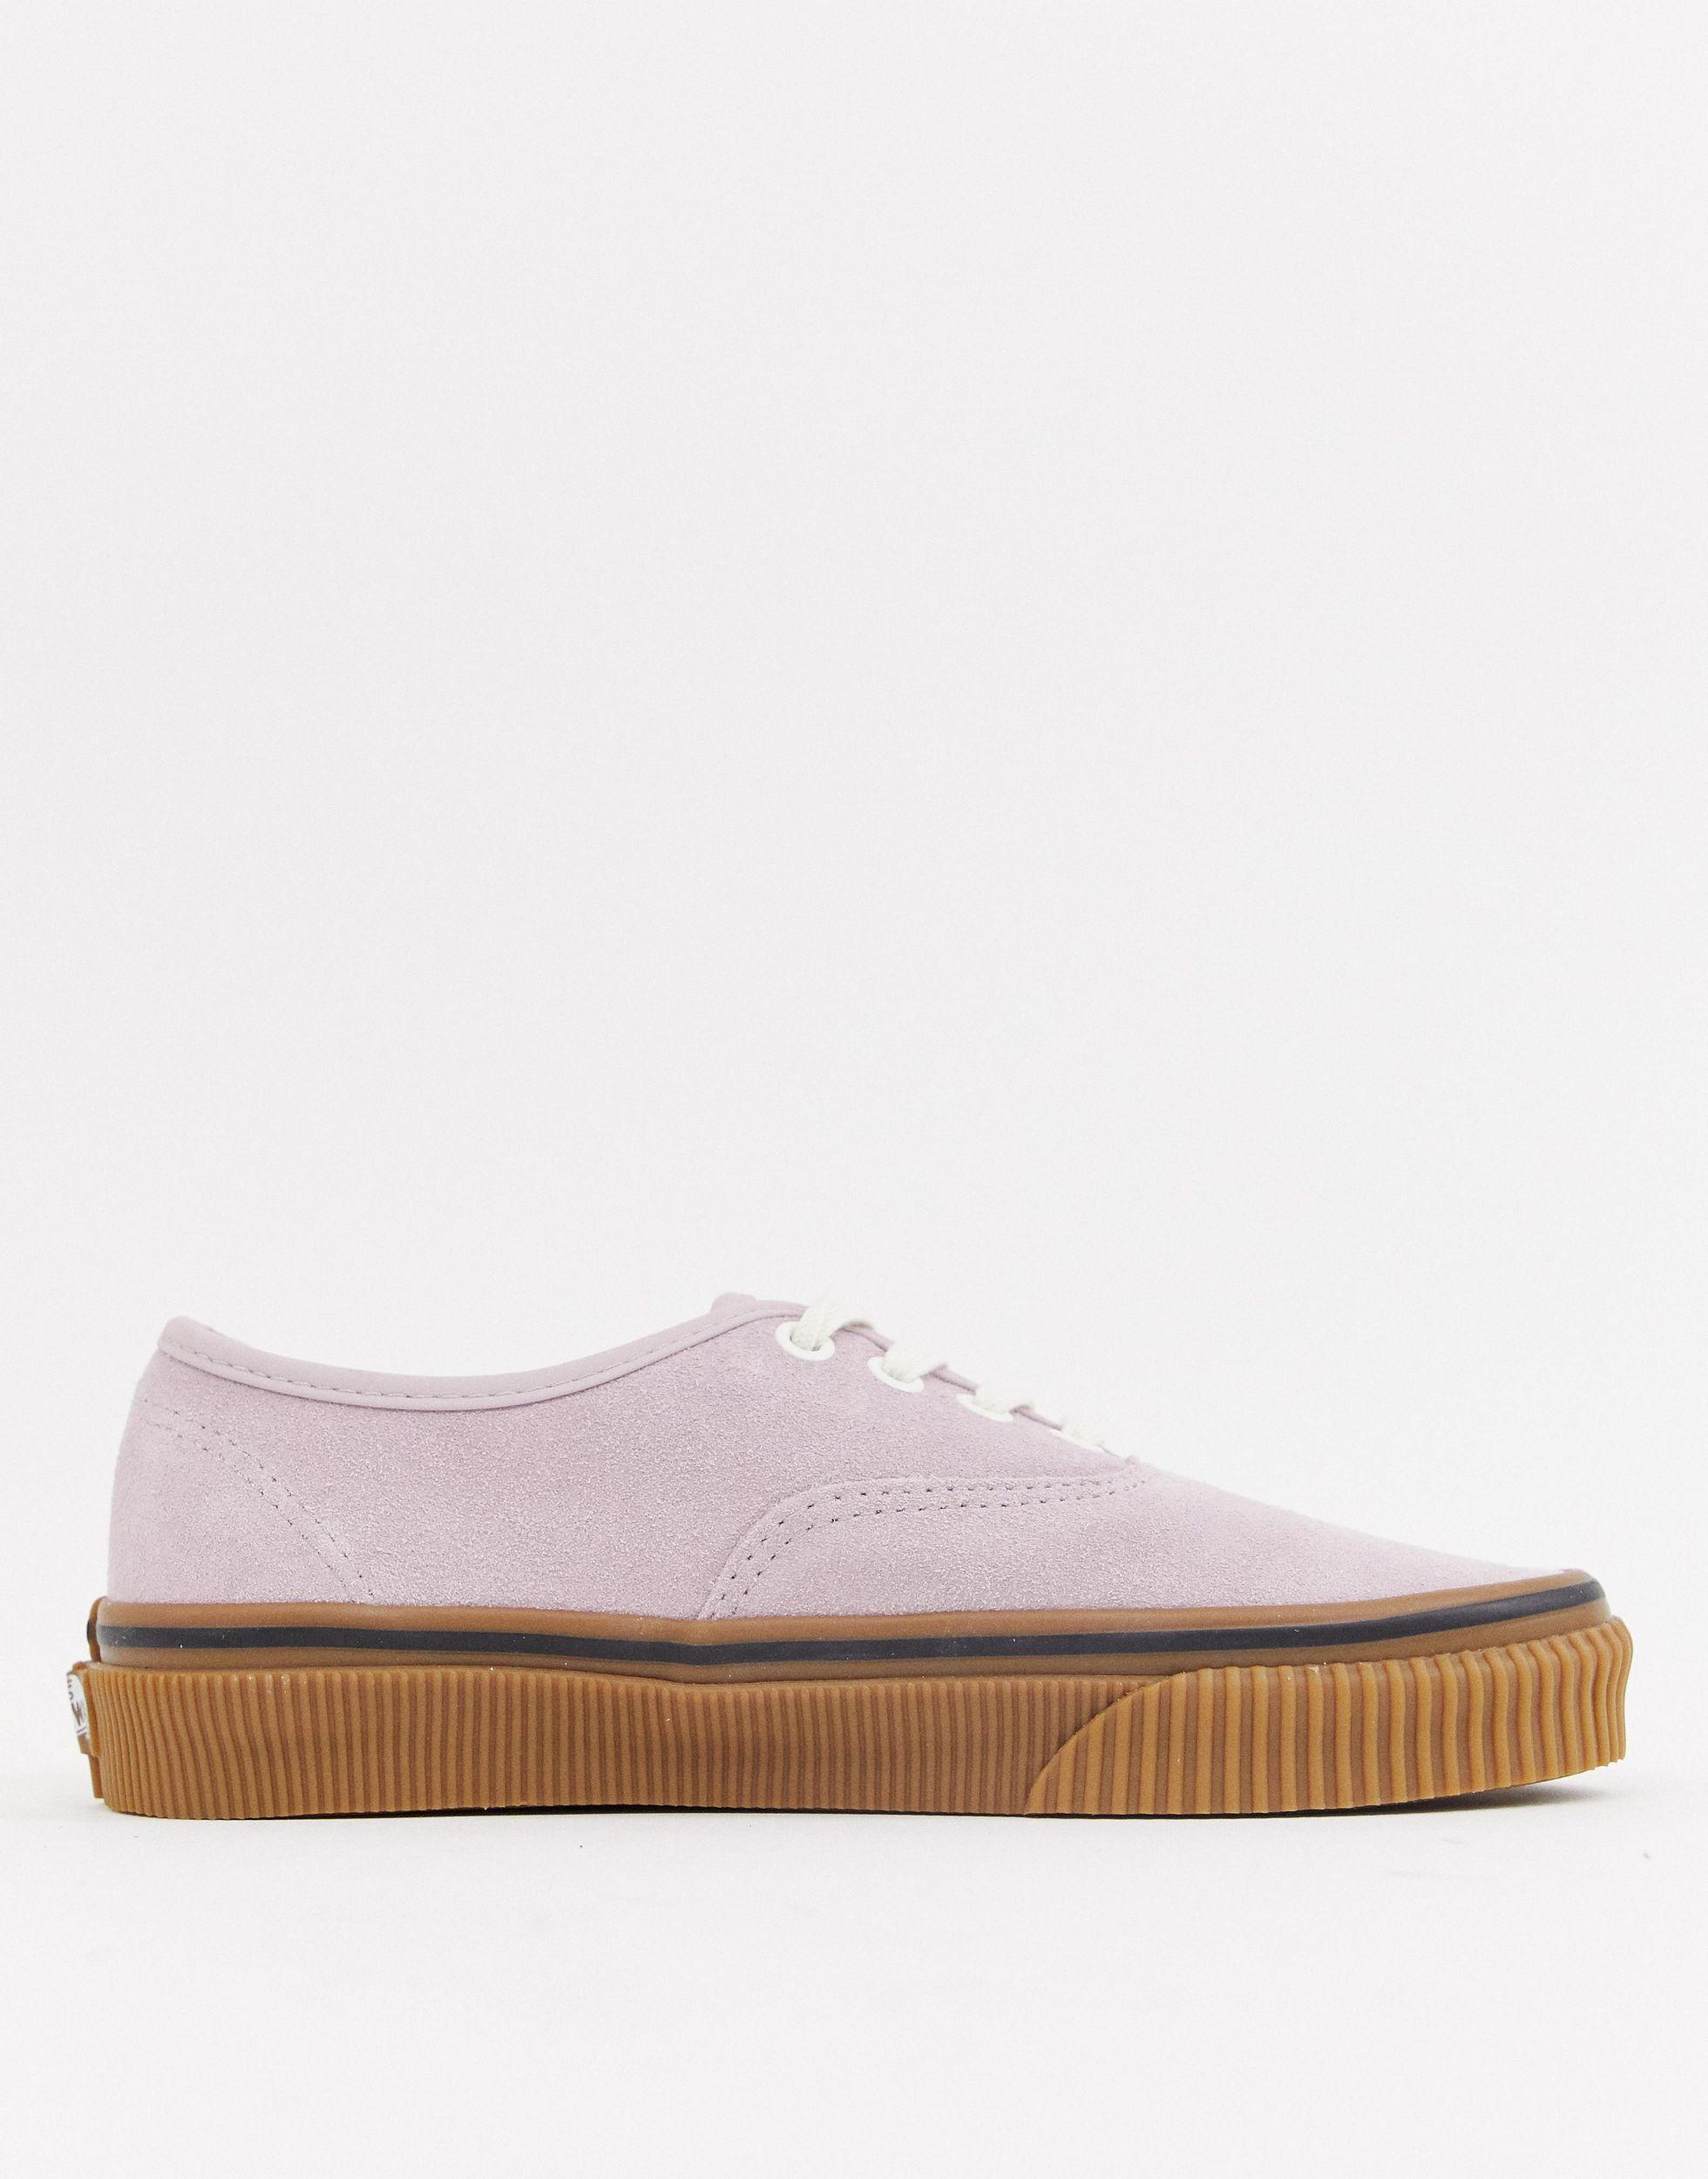 Vans Authentic Suede And Gum Pink Trainers Hot Sale, 56% OFF |  www.velocityusa.com